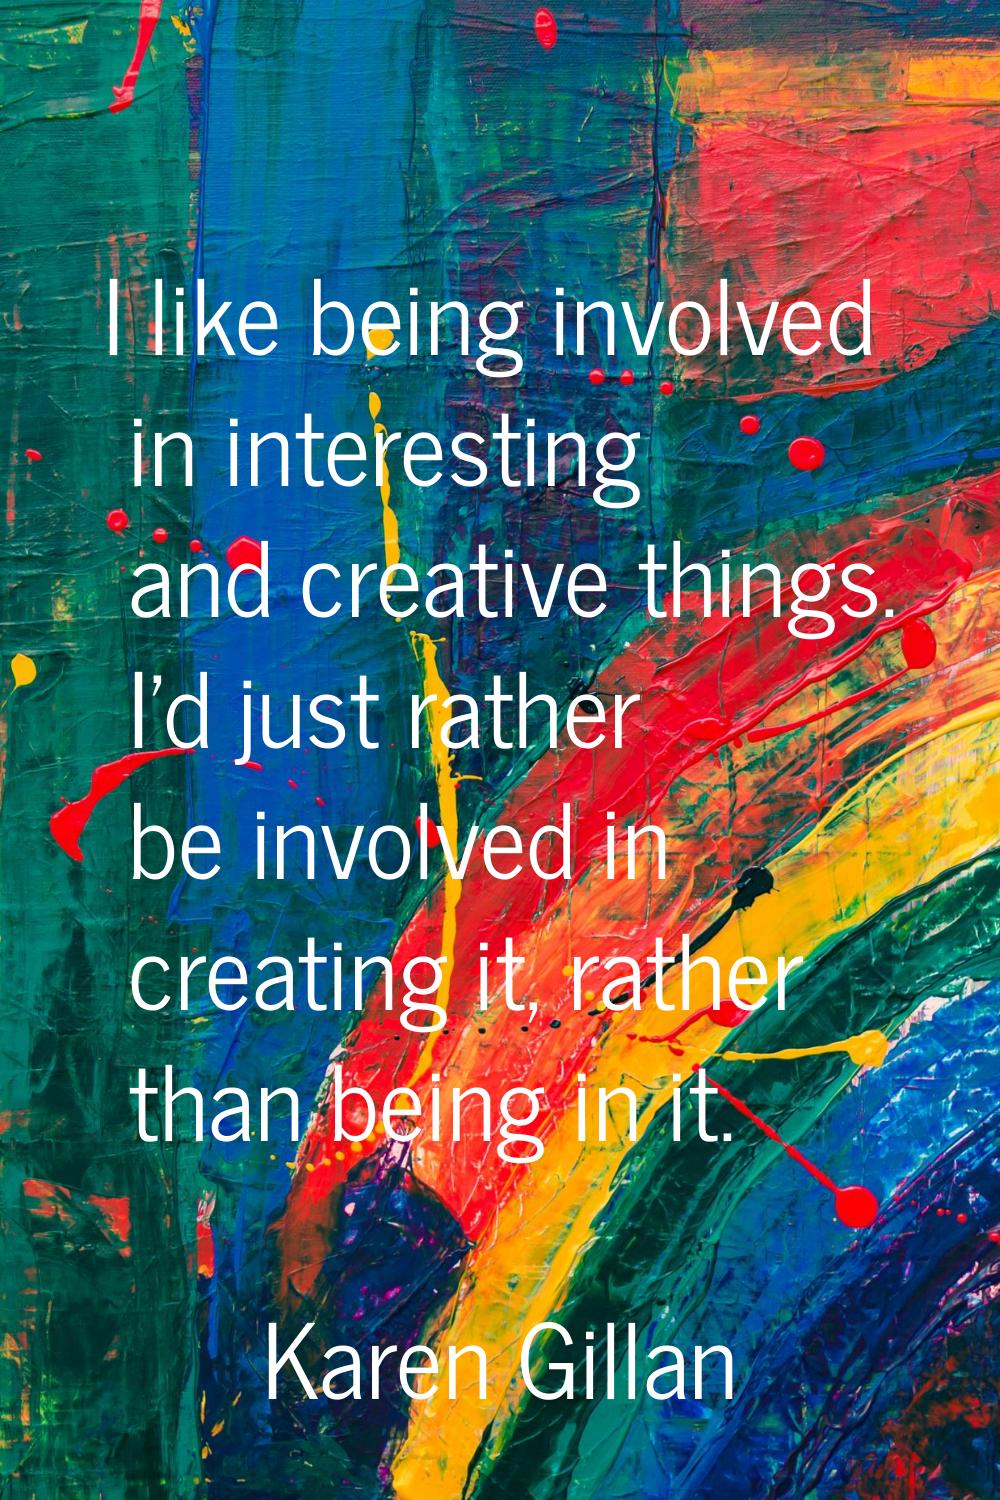 I like being involved in interesting and creative things. I'd just rather be involved in creating i